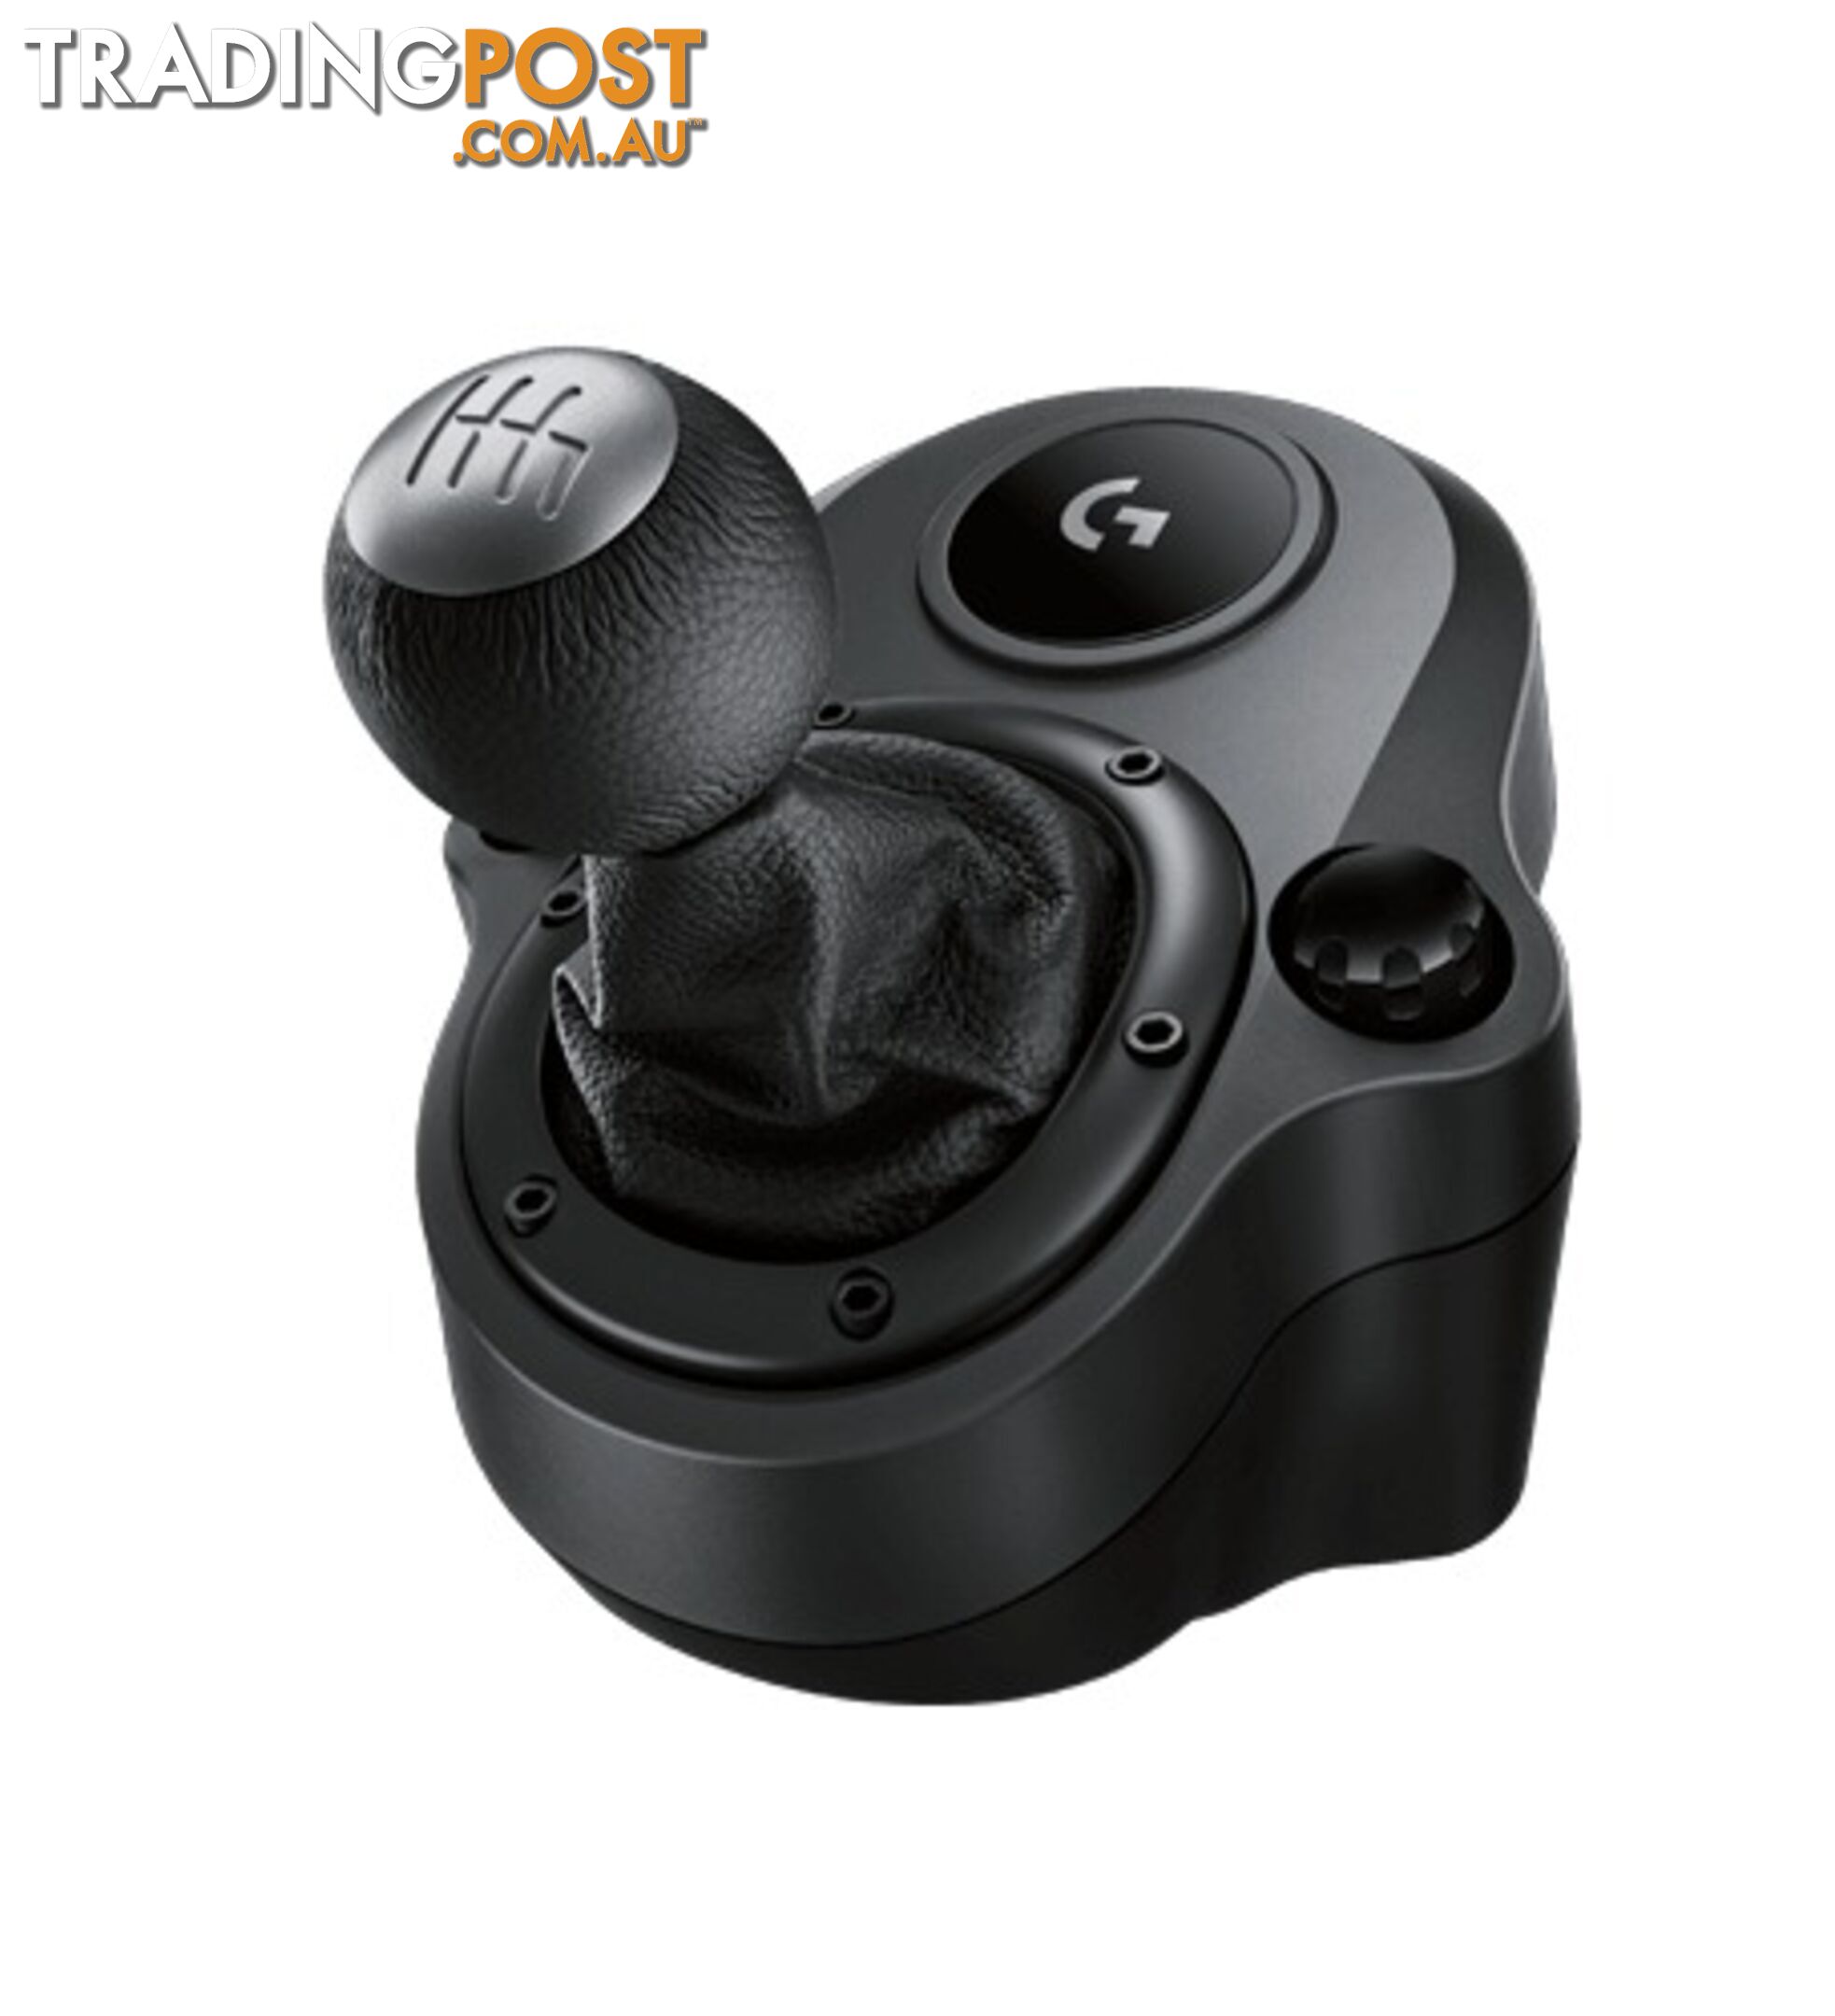 Logitech Driving Force Shifter for G29 and G920 Racing Wheels Six-Speed Shifter with Push-down reverse Secure mounting - JOLT-FORCESHIFT